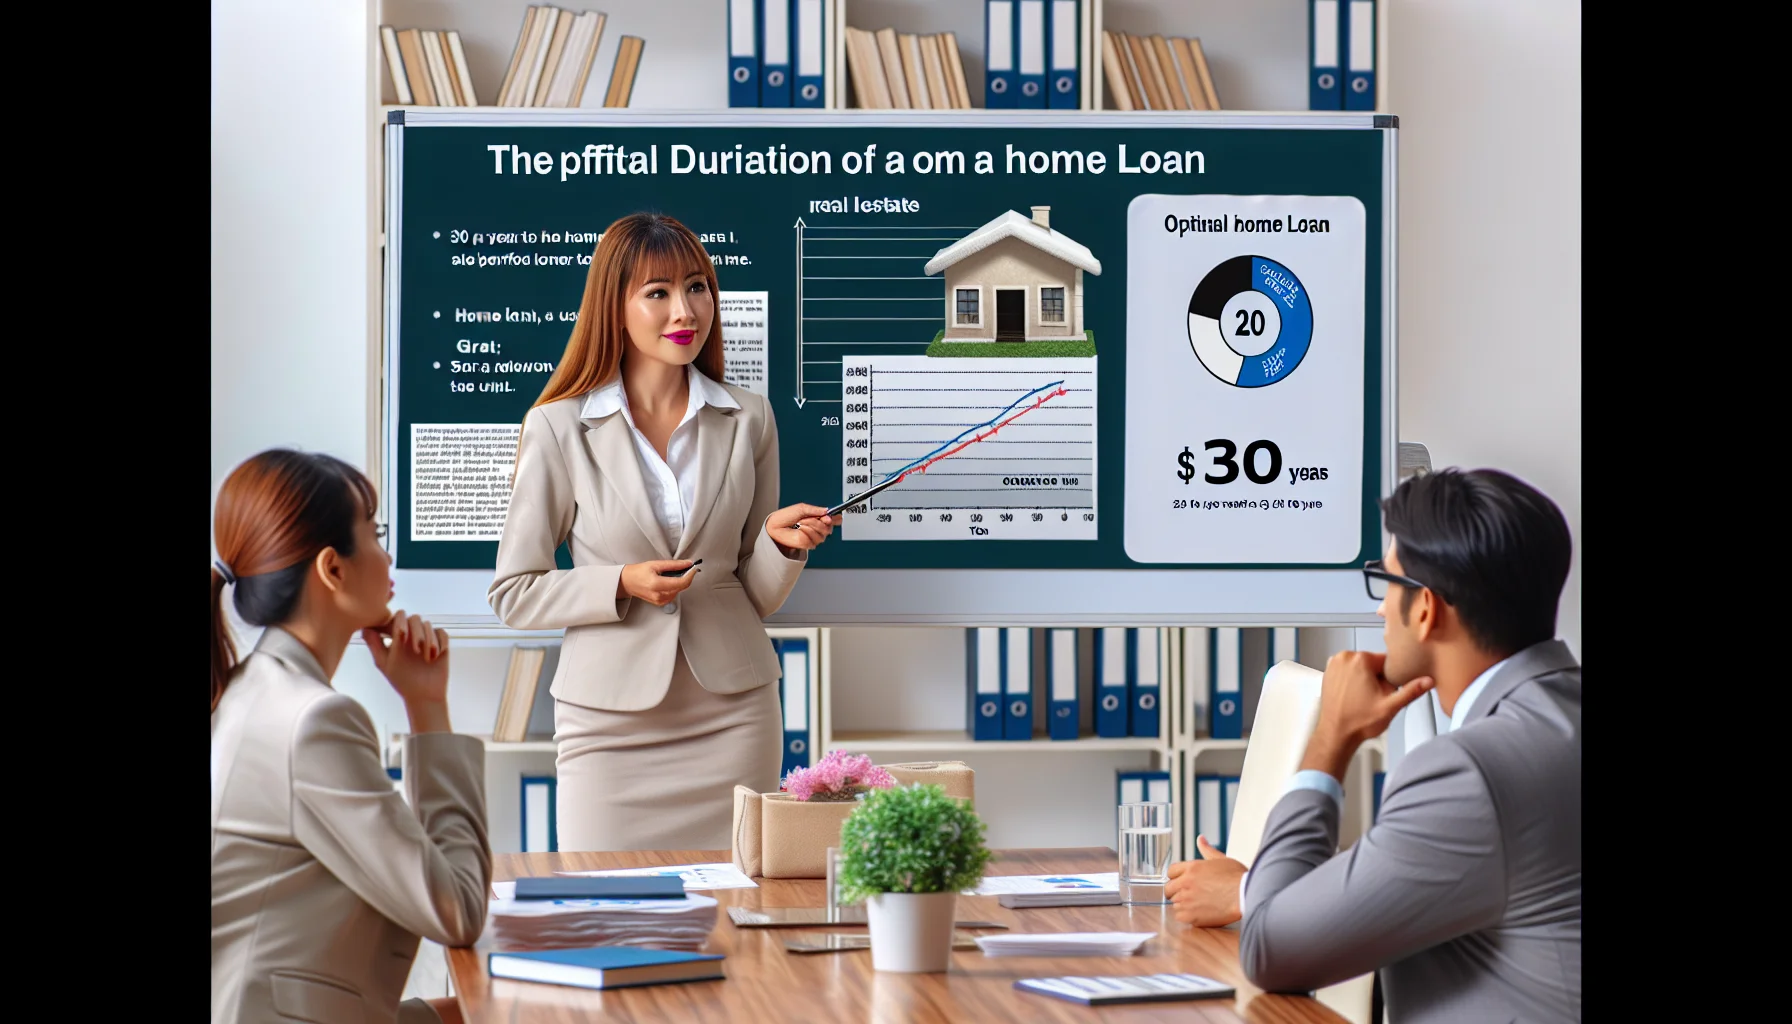 Create a humorous and realistic image that showcases the optimal duration of a home loan in an ideal real estate scenario. This image should consist of a brightly lit, well-decorated office with a South Asian female loan officer explaining the optimal home loan timeline. Other details can include a chart on a whiteboard showing the perfect scenario for a home loan (graph that indicates a span of 30 years as the optimal time), a table with finance books, and a couple of East Asian descent listening attentively.